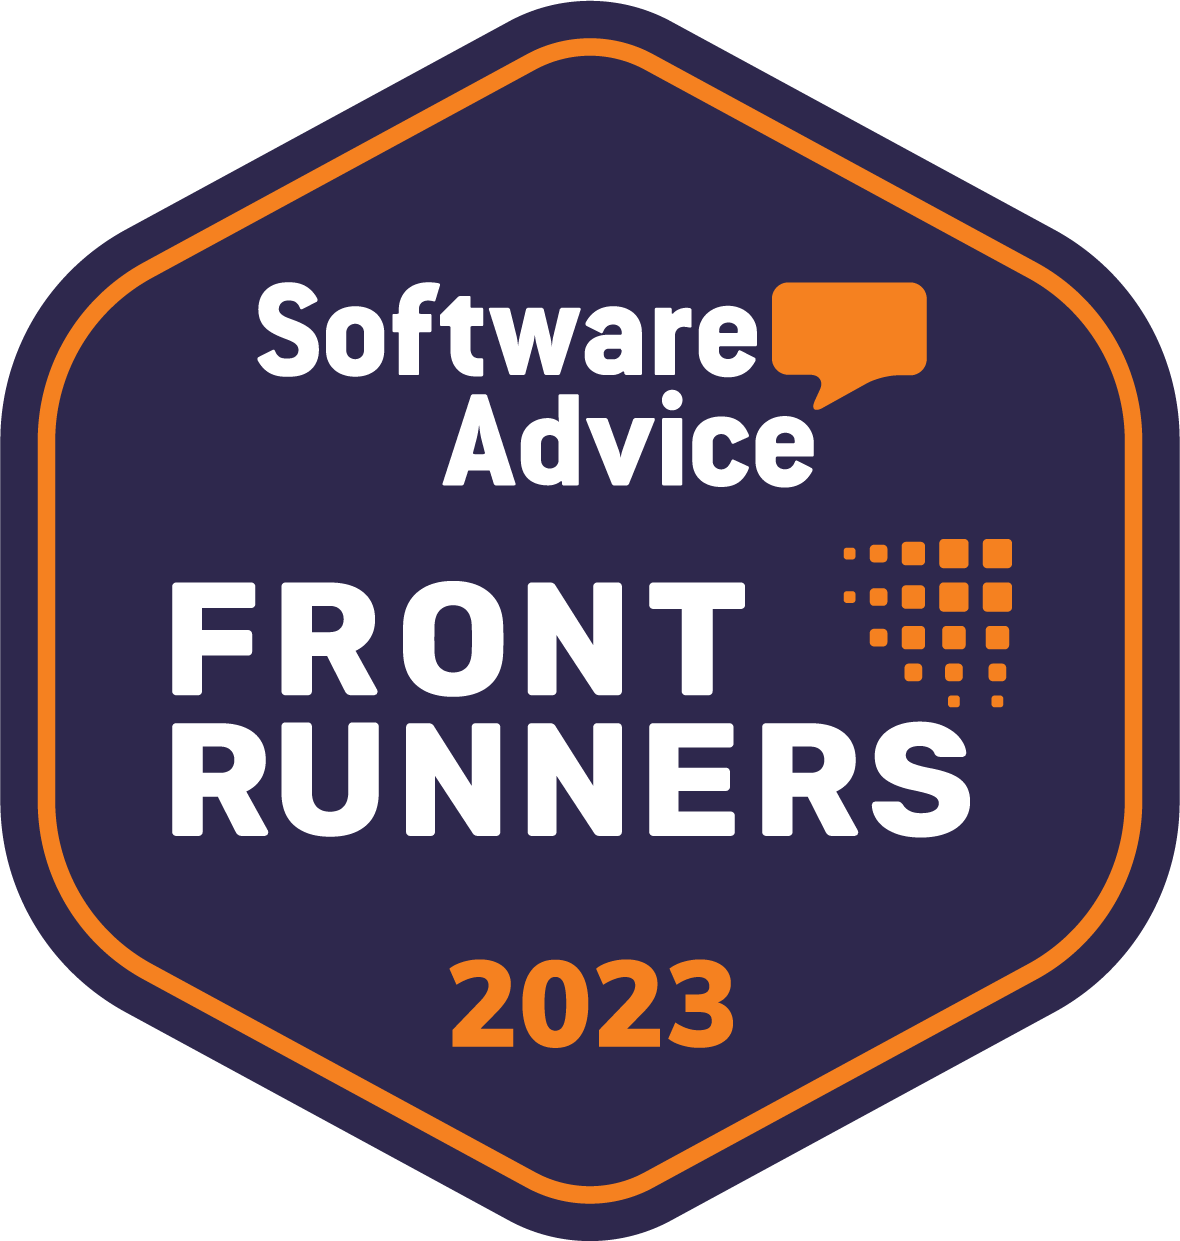 Software Advice Front Runner 2023 Badge